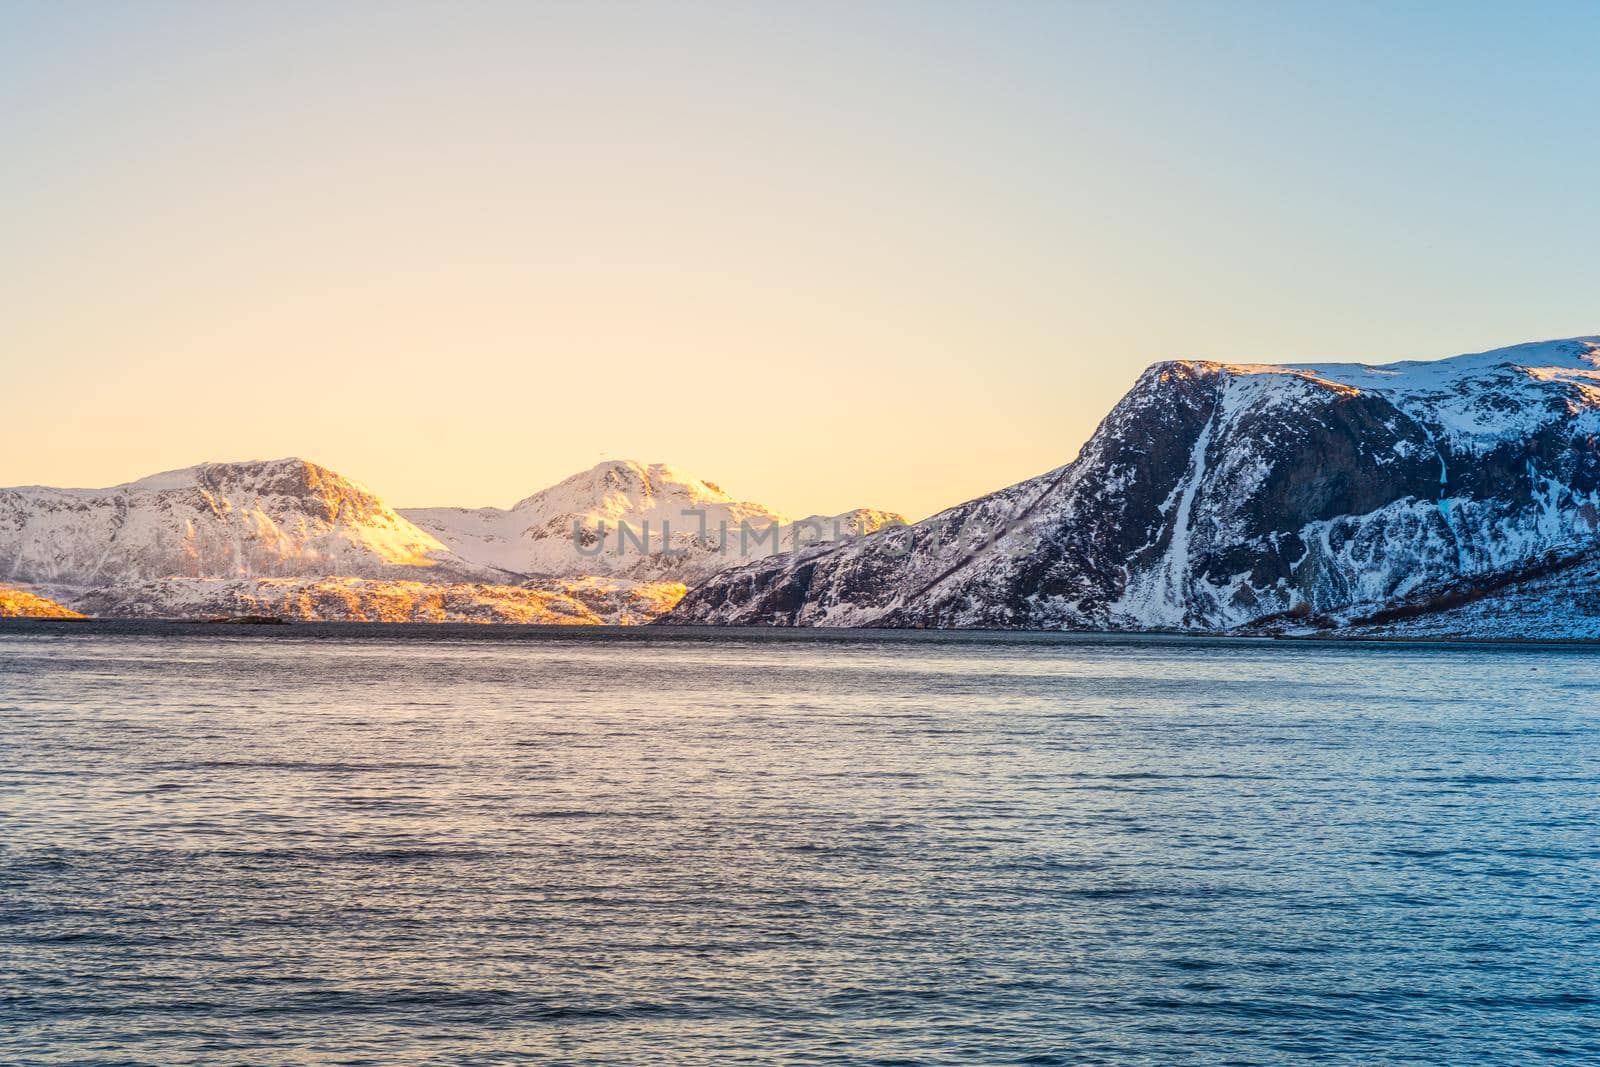 Norwegian Snow Mountains with Fjord close to Tromso by bildgigant